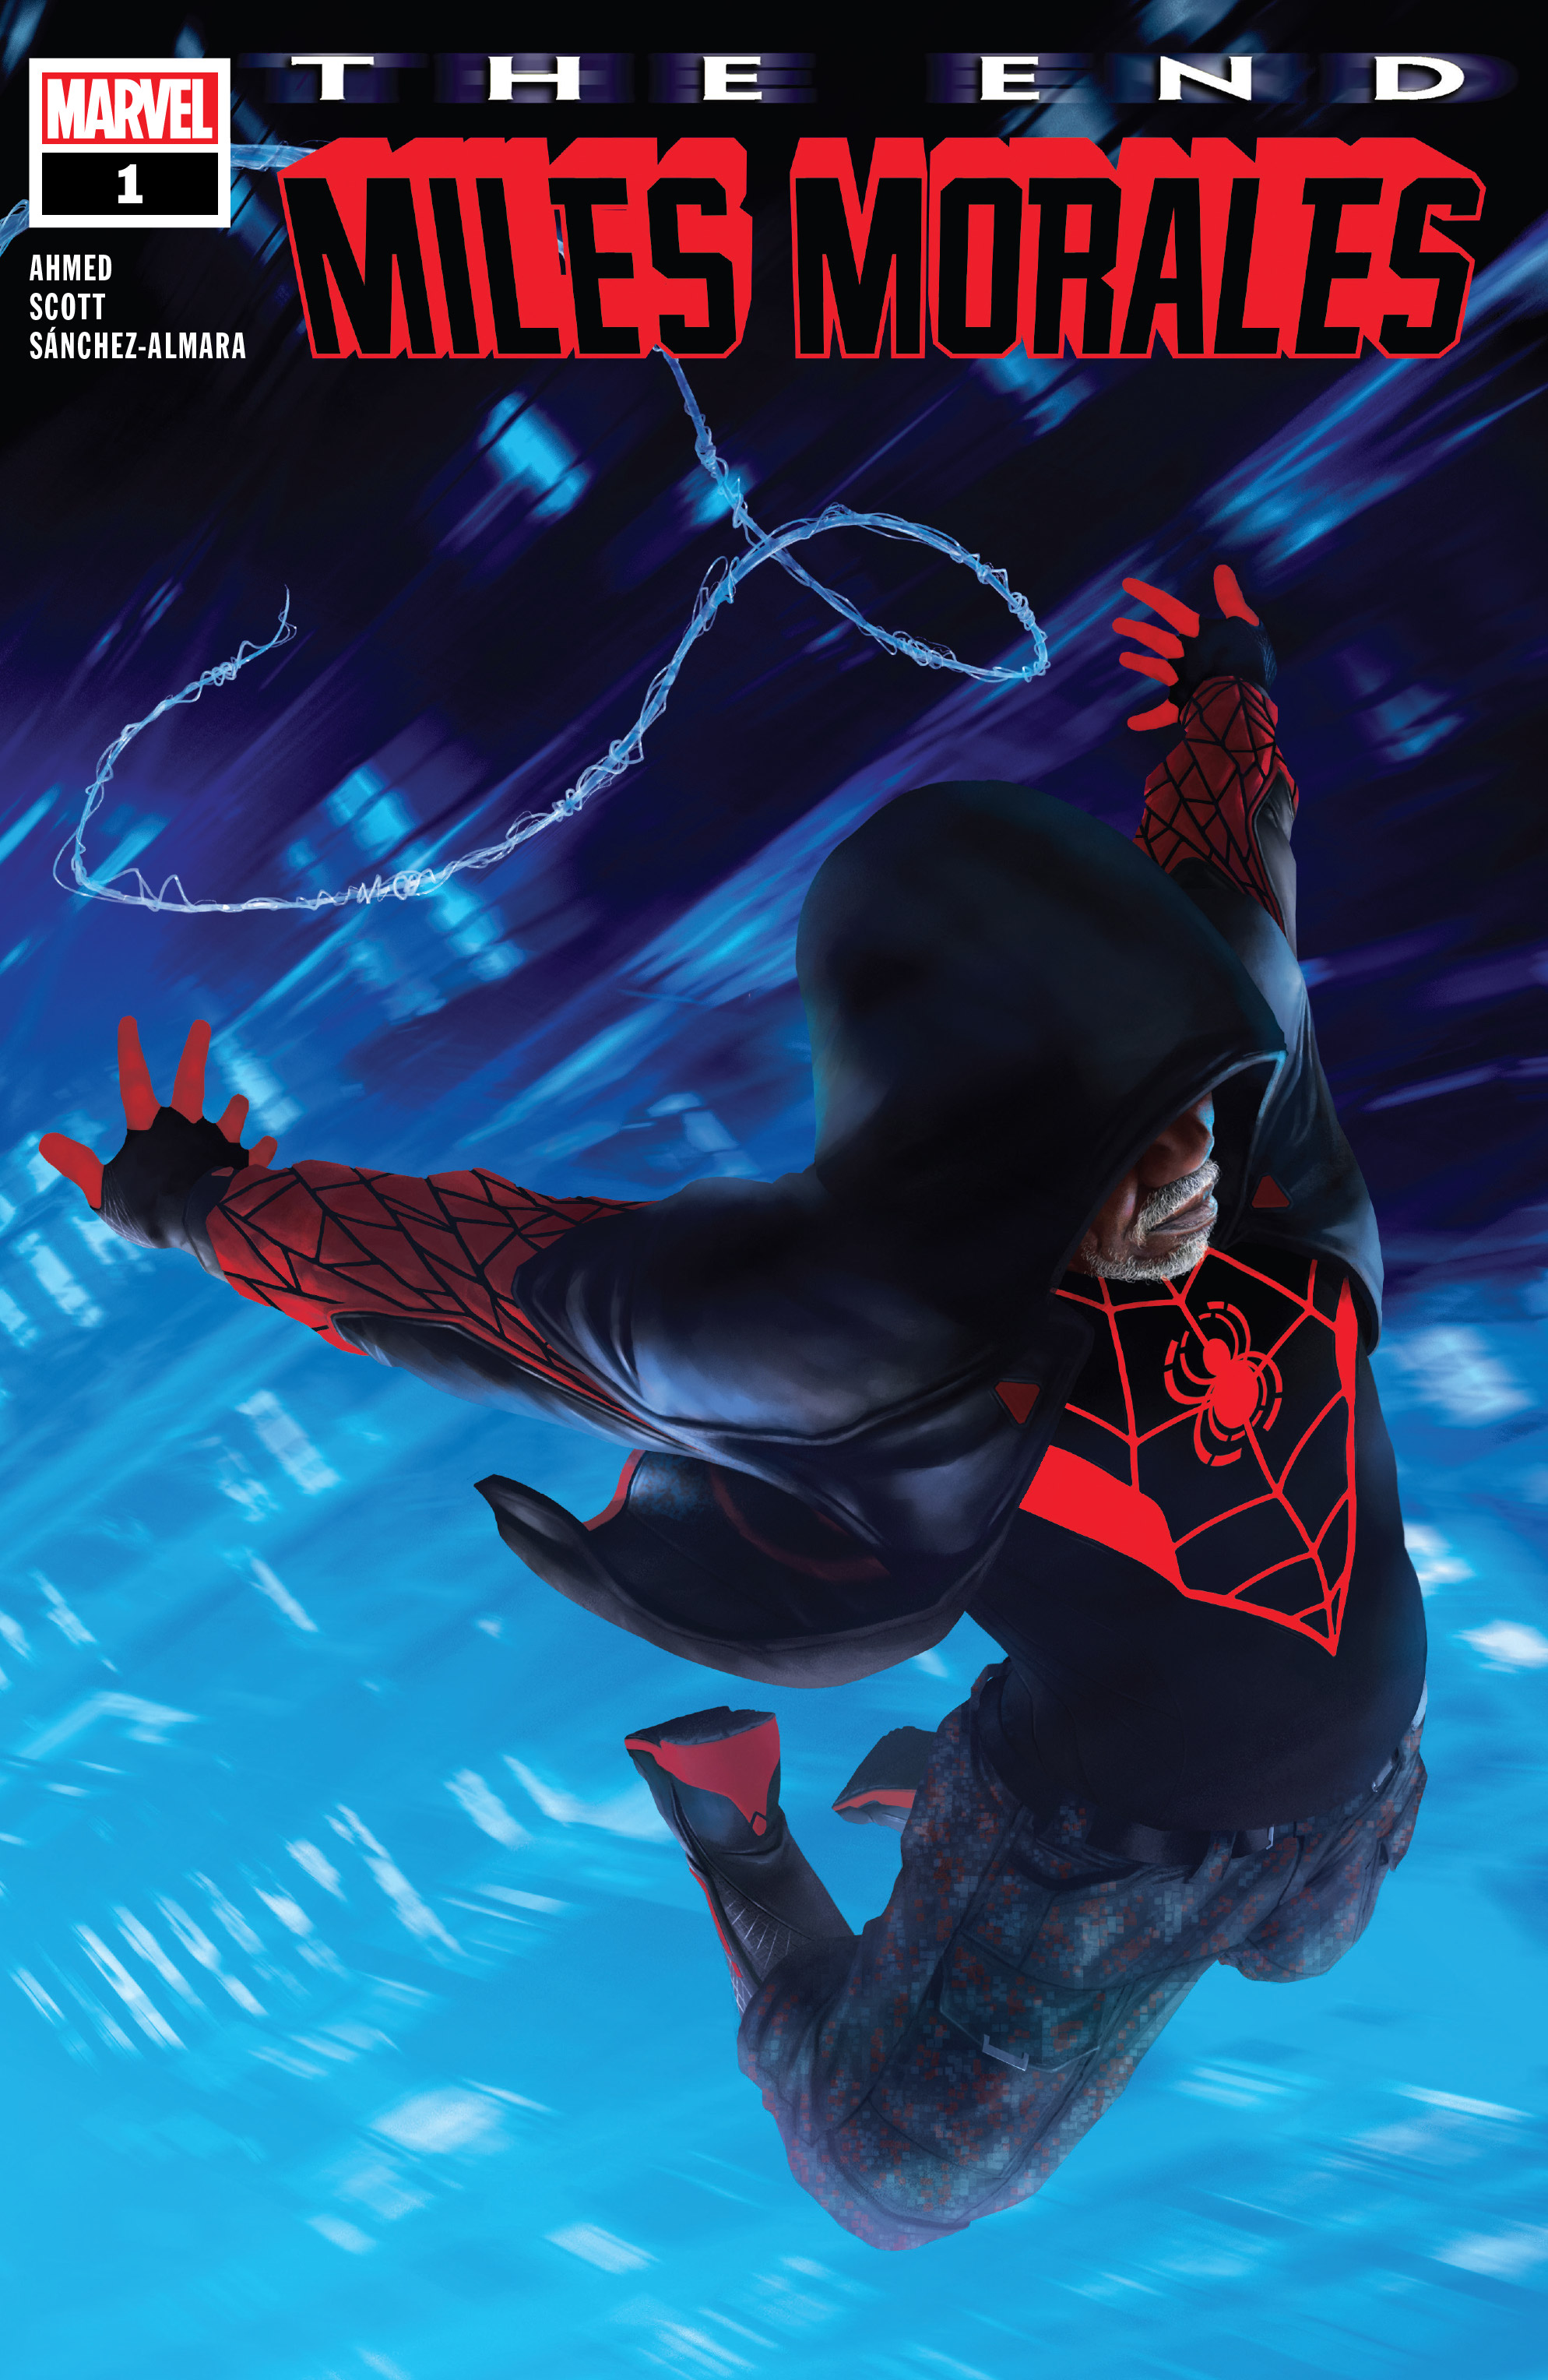 Read online Miles Morales: The End comic -  Issue # Full - 1